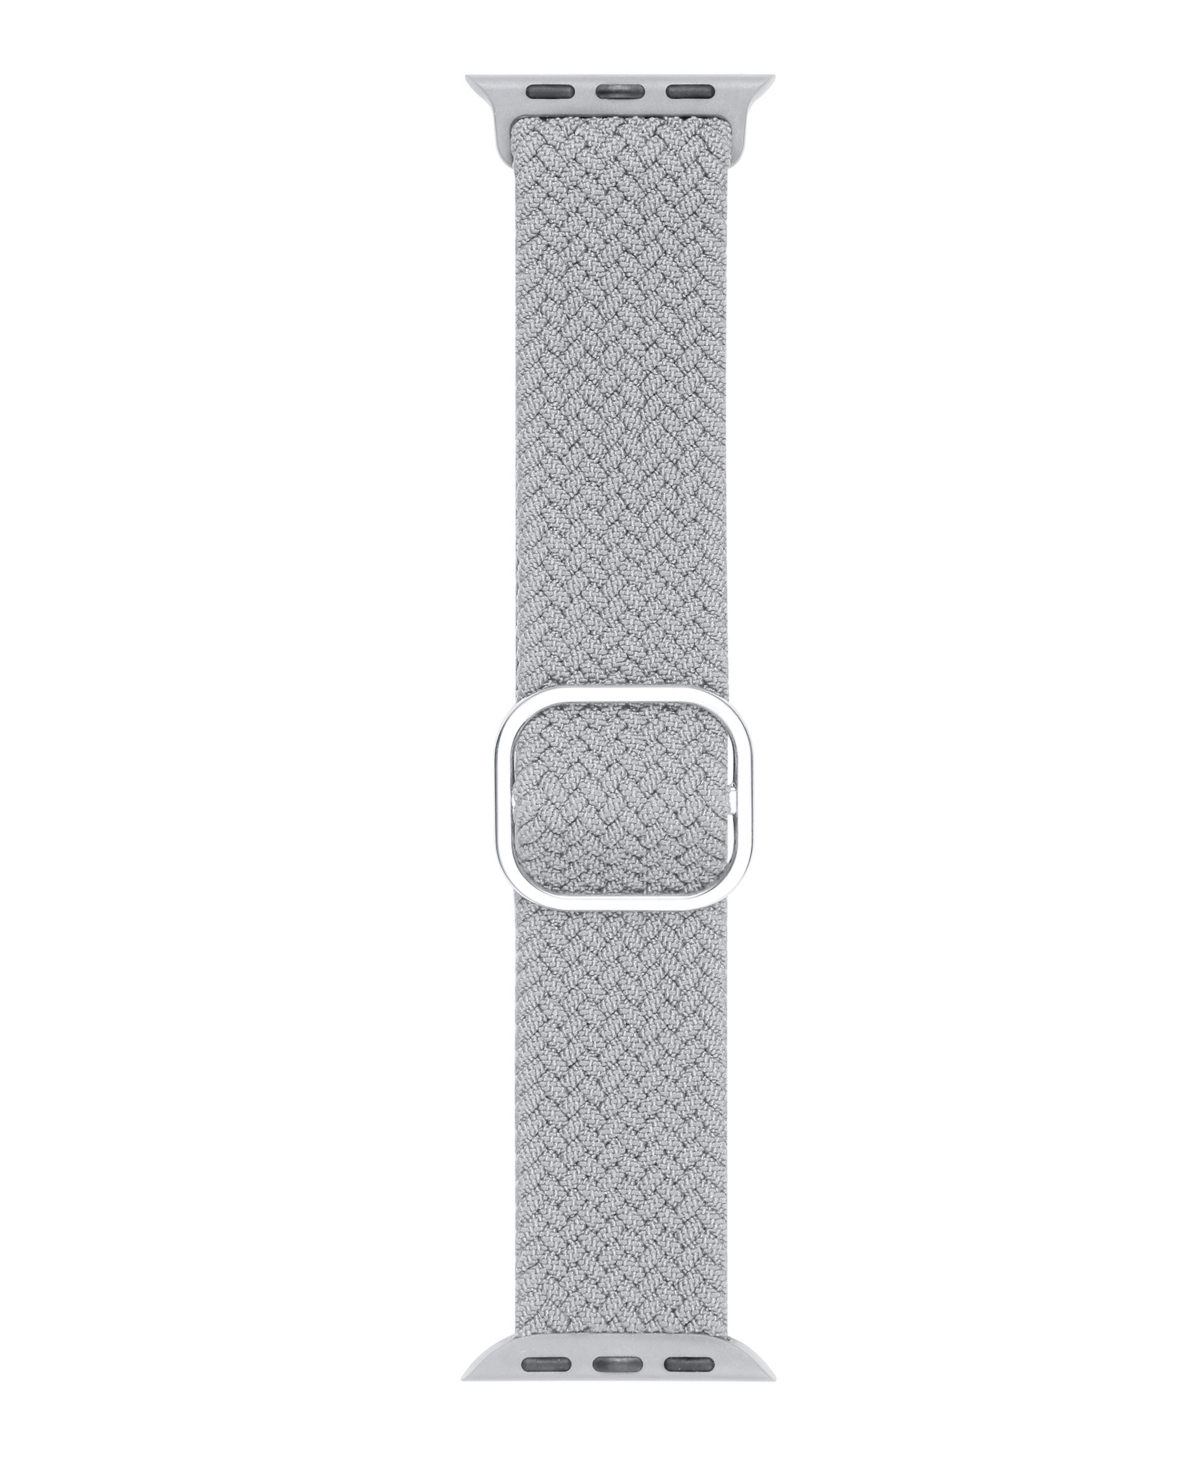 Shop Posh Tech Unisex Avalon Nylon Band For Apple Watch Size-42mm,44mm,45mm,49mm In Grey